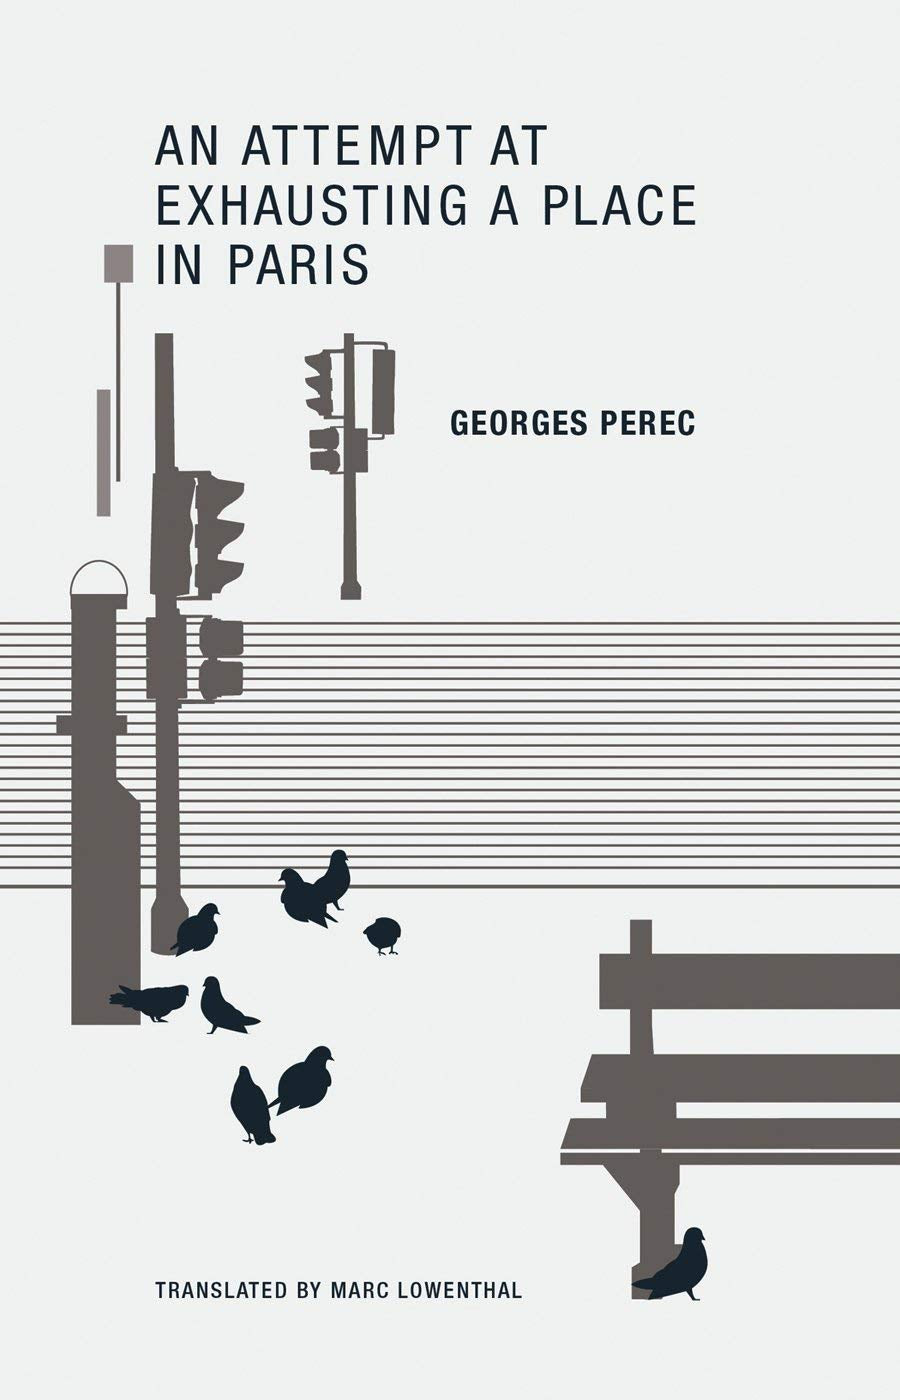 An Attempt at Exhausting a Place in Paris by Georges Perec